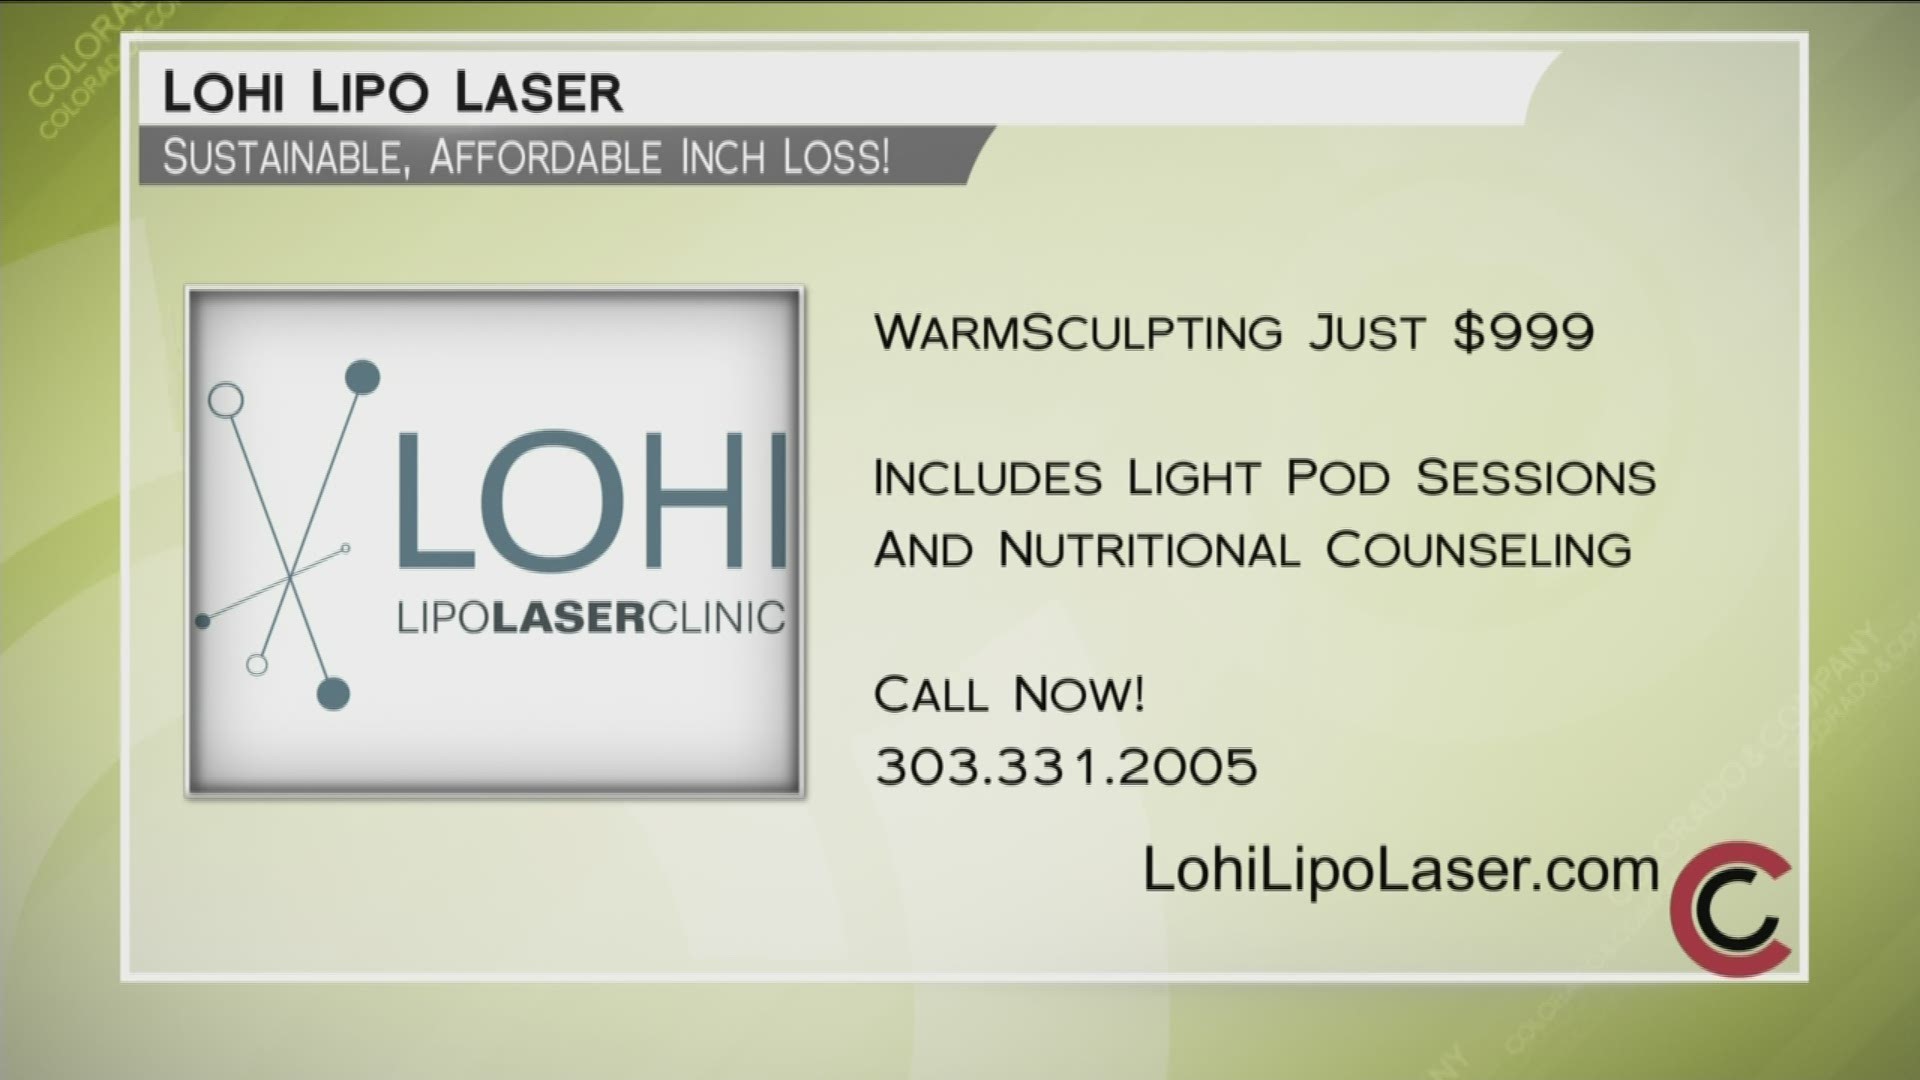 Call Lohi Lipo Laser at 303.331.2005 or visit LohiLipoLaser.com to find out about today's specials and how you can get back to looking the way you want.